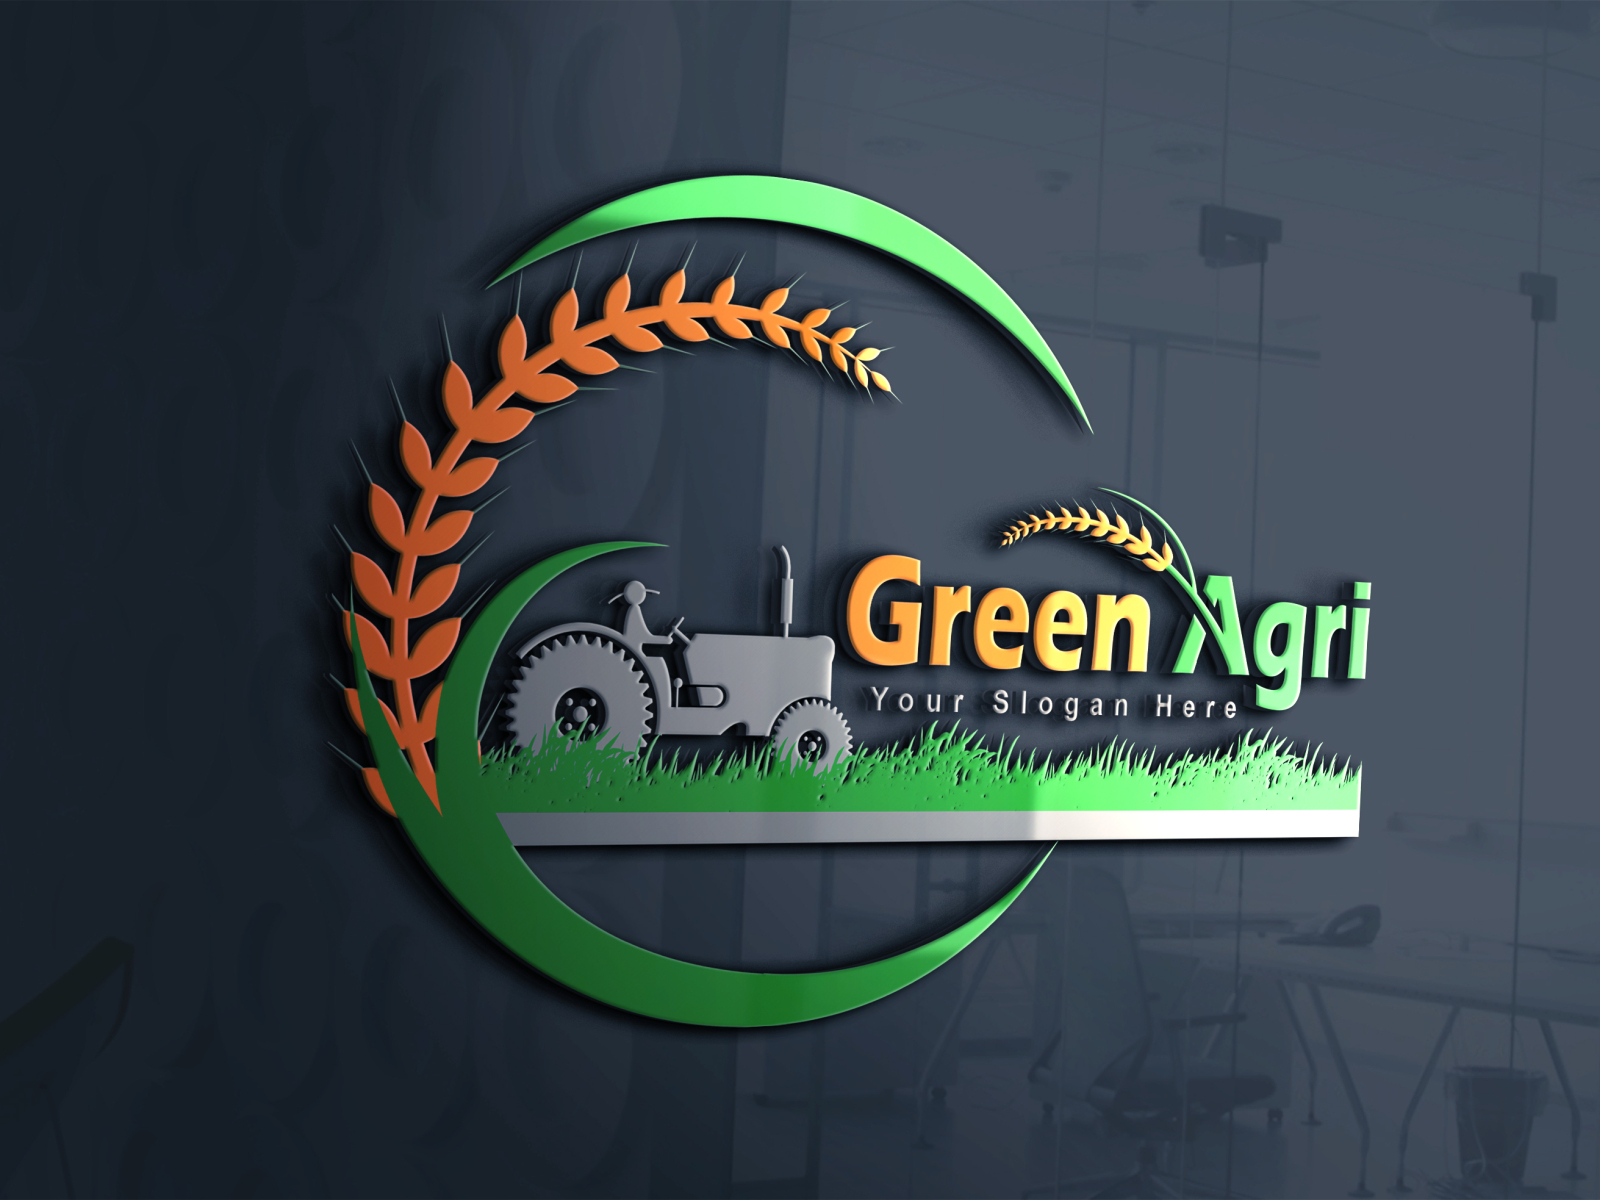 agriculture logo design by Md shariar islam on Dribbble